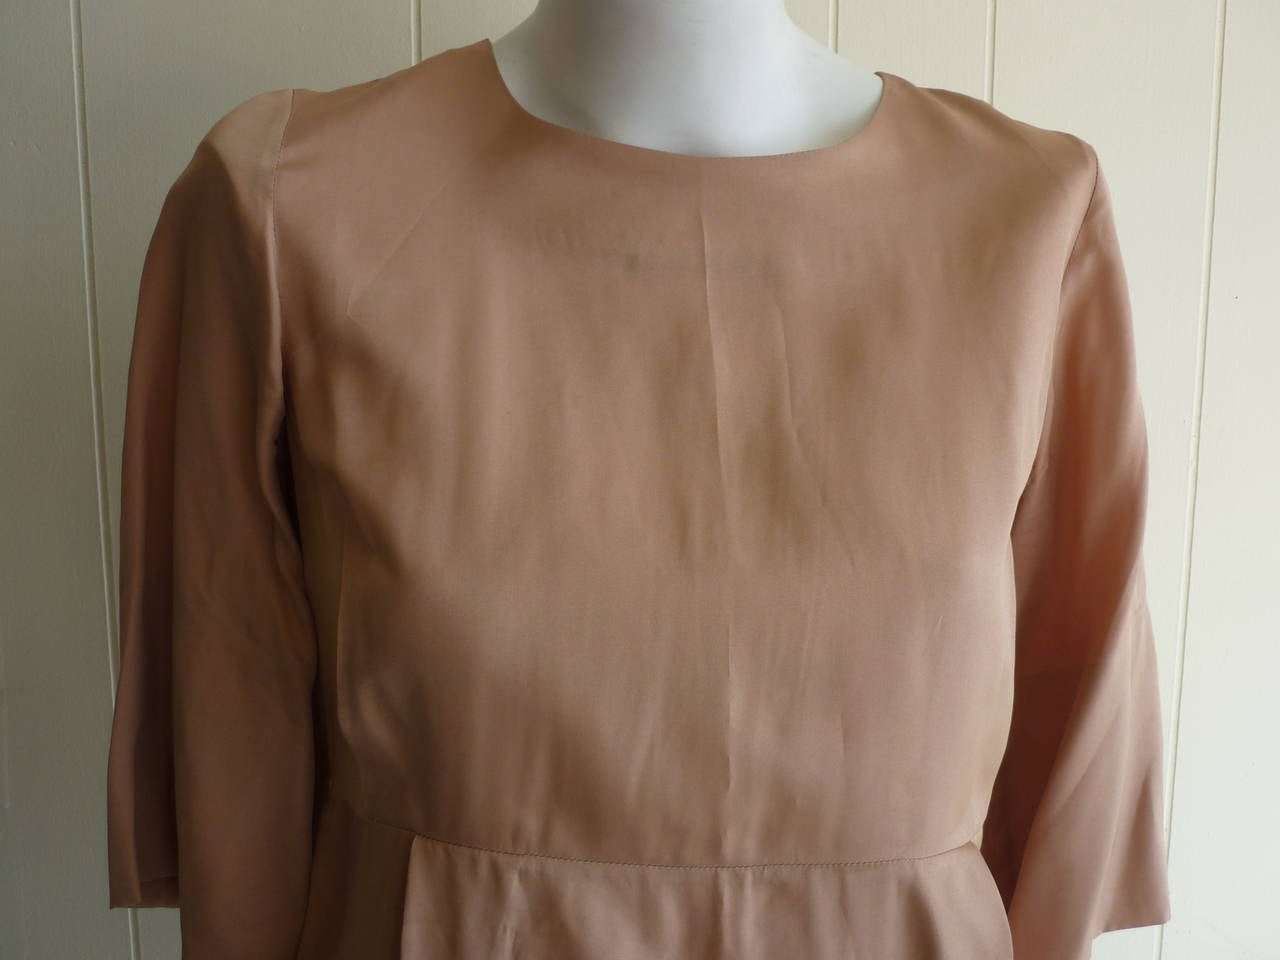 Very nice simple tunic with subtle elements. It would look perfect with slim pants or leggings. The sleeves are elbow lenght, there is pleating on the front and hidden button closure on the back.

There are also two slit pockets.